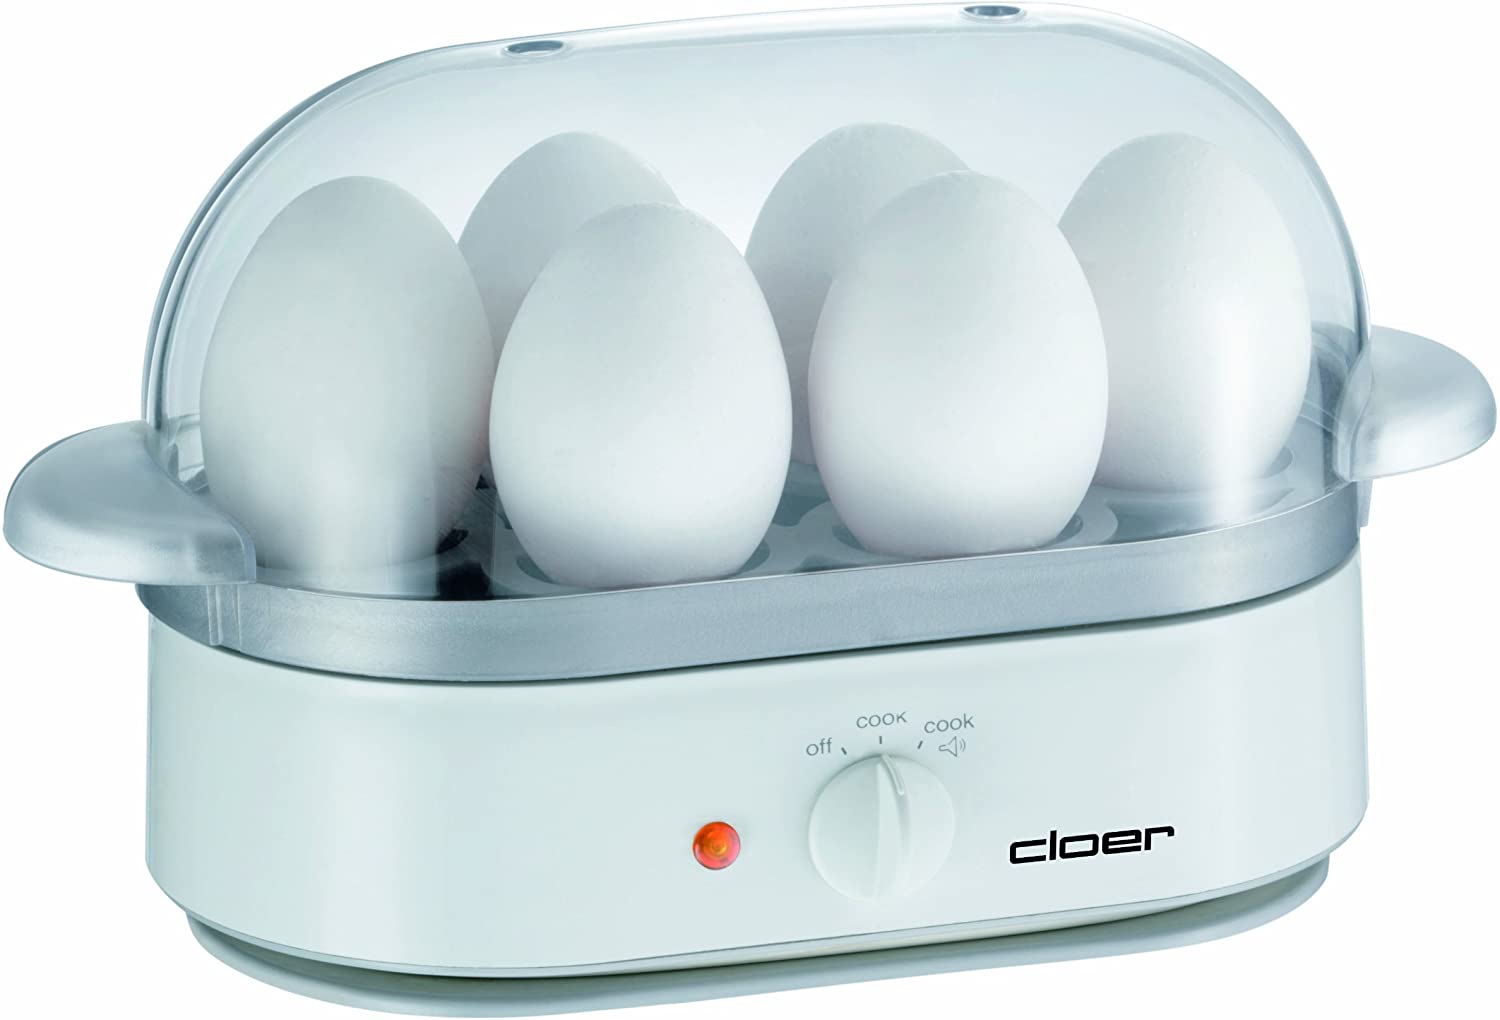 Cloer 6091 - egg cookers